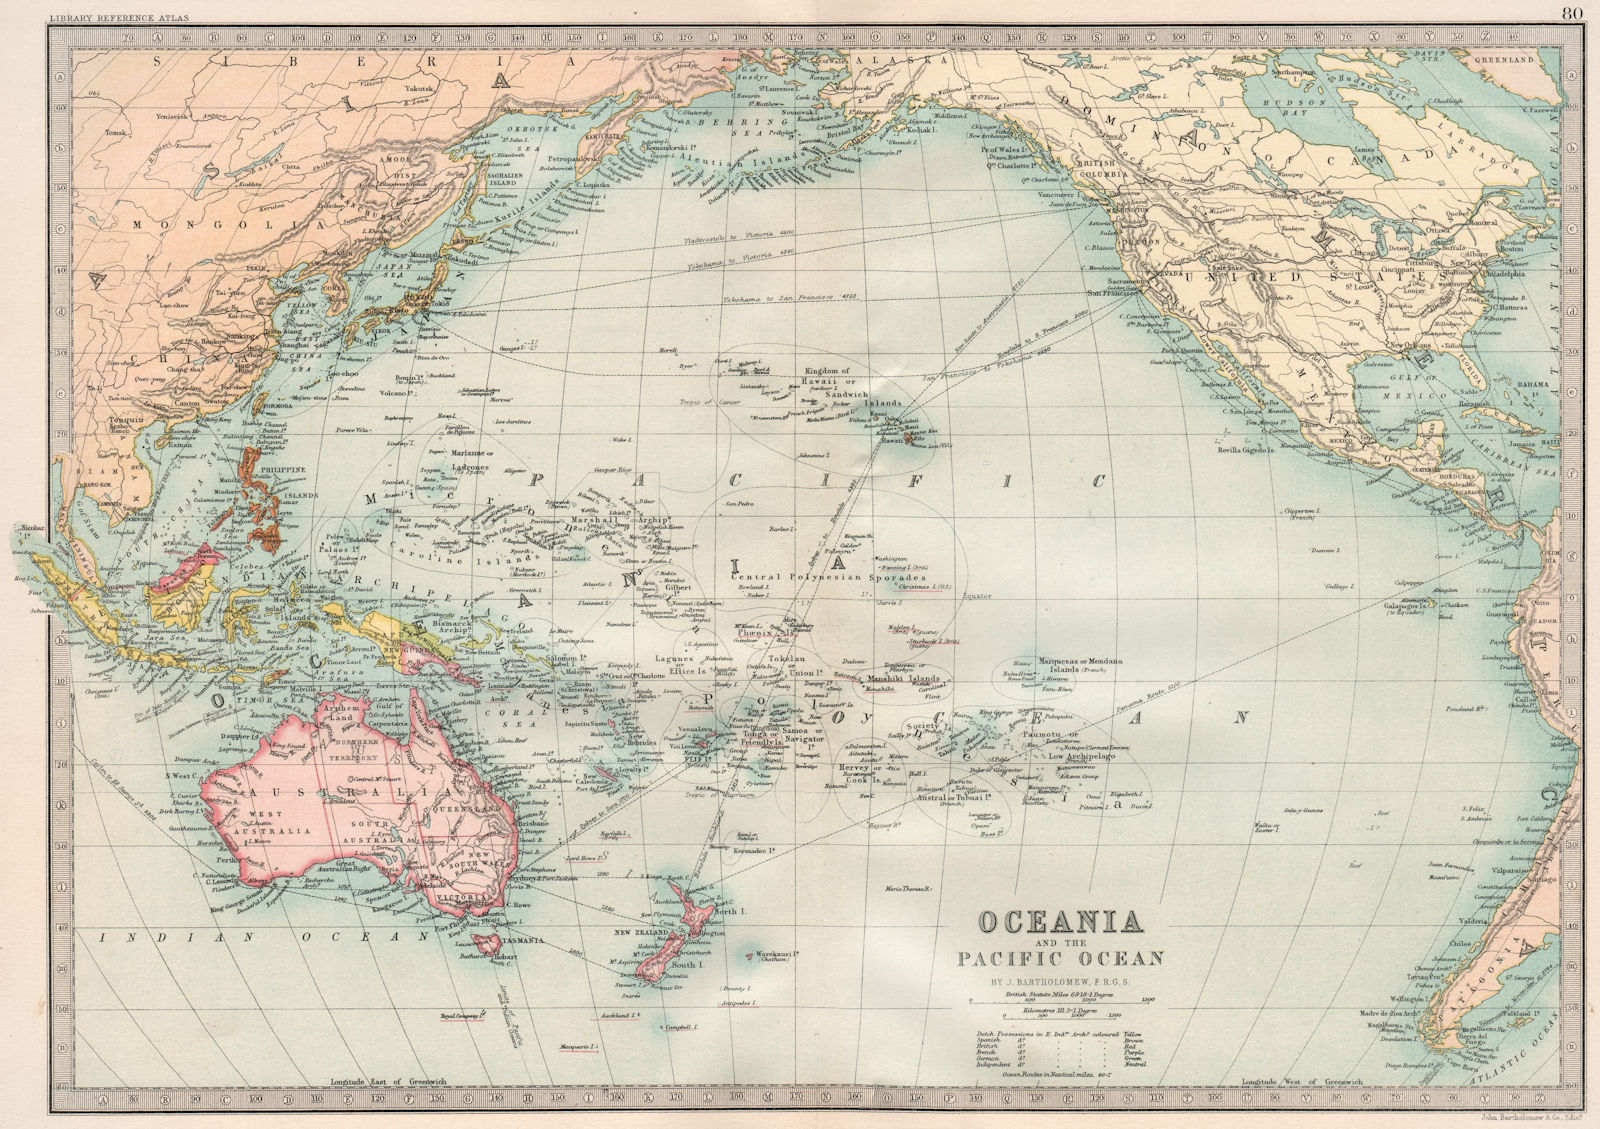 AUSTRALASIA. Oceania and the Pacific Ocean. BARTHOLOMEW 1890 old antique map